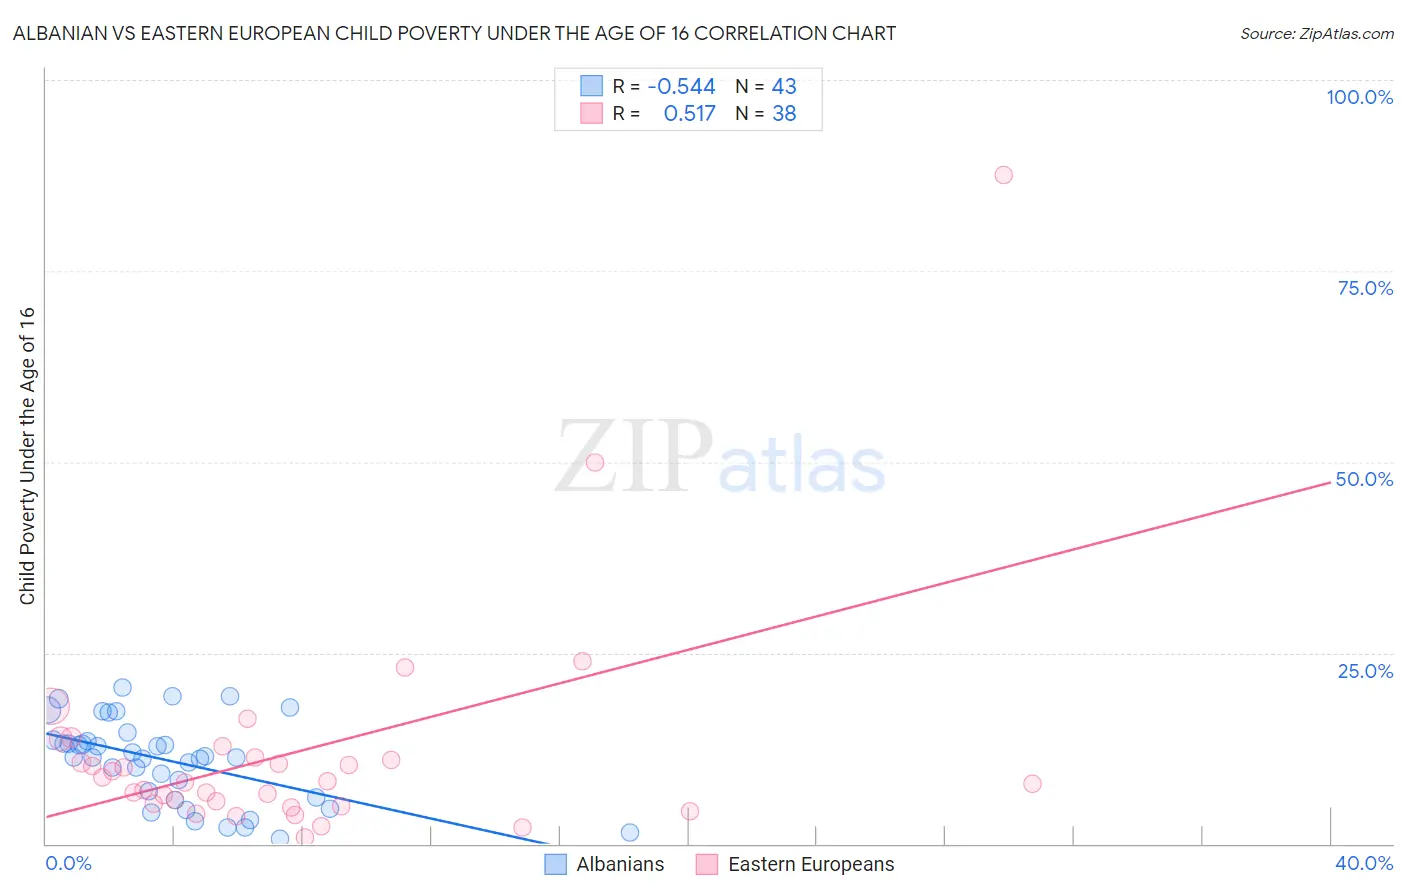 Albanian vs Eastern European Child Poverty Under the Age of 16